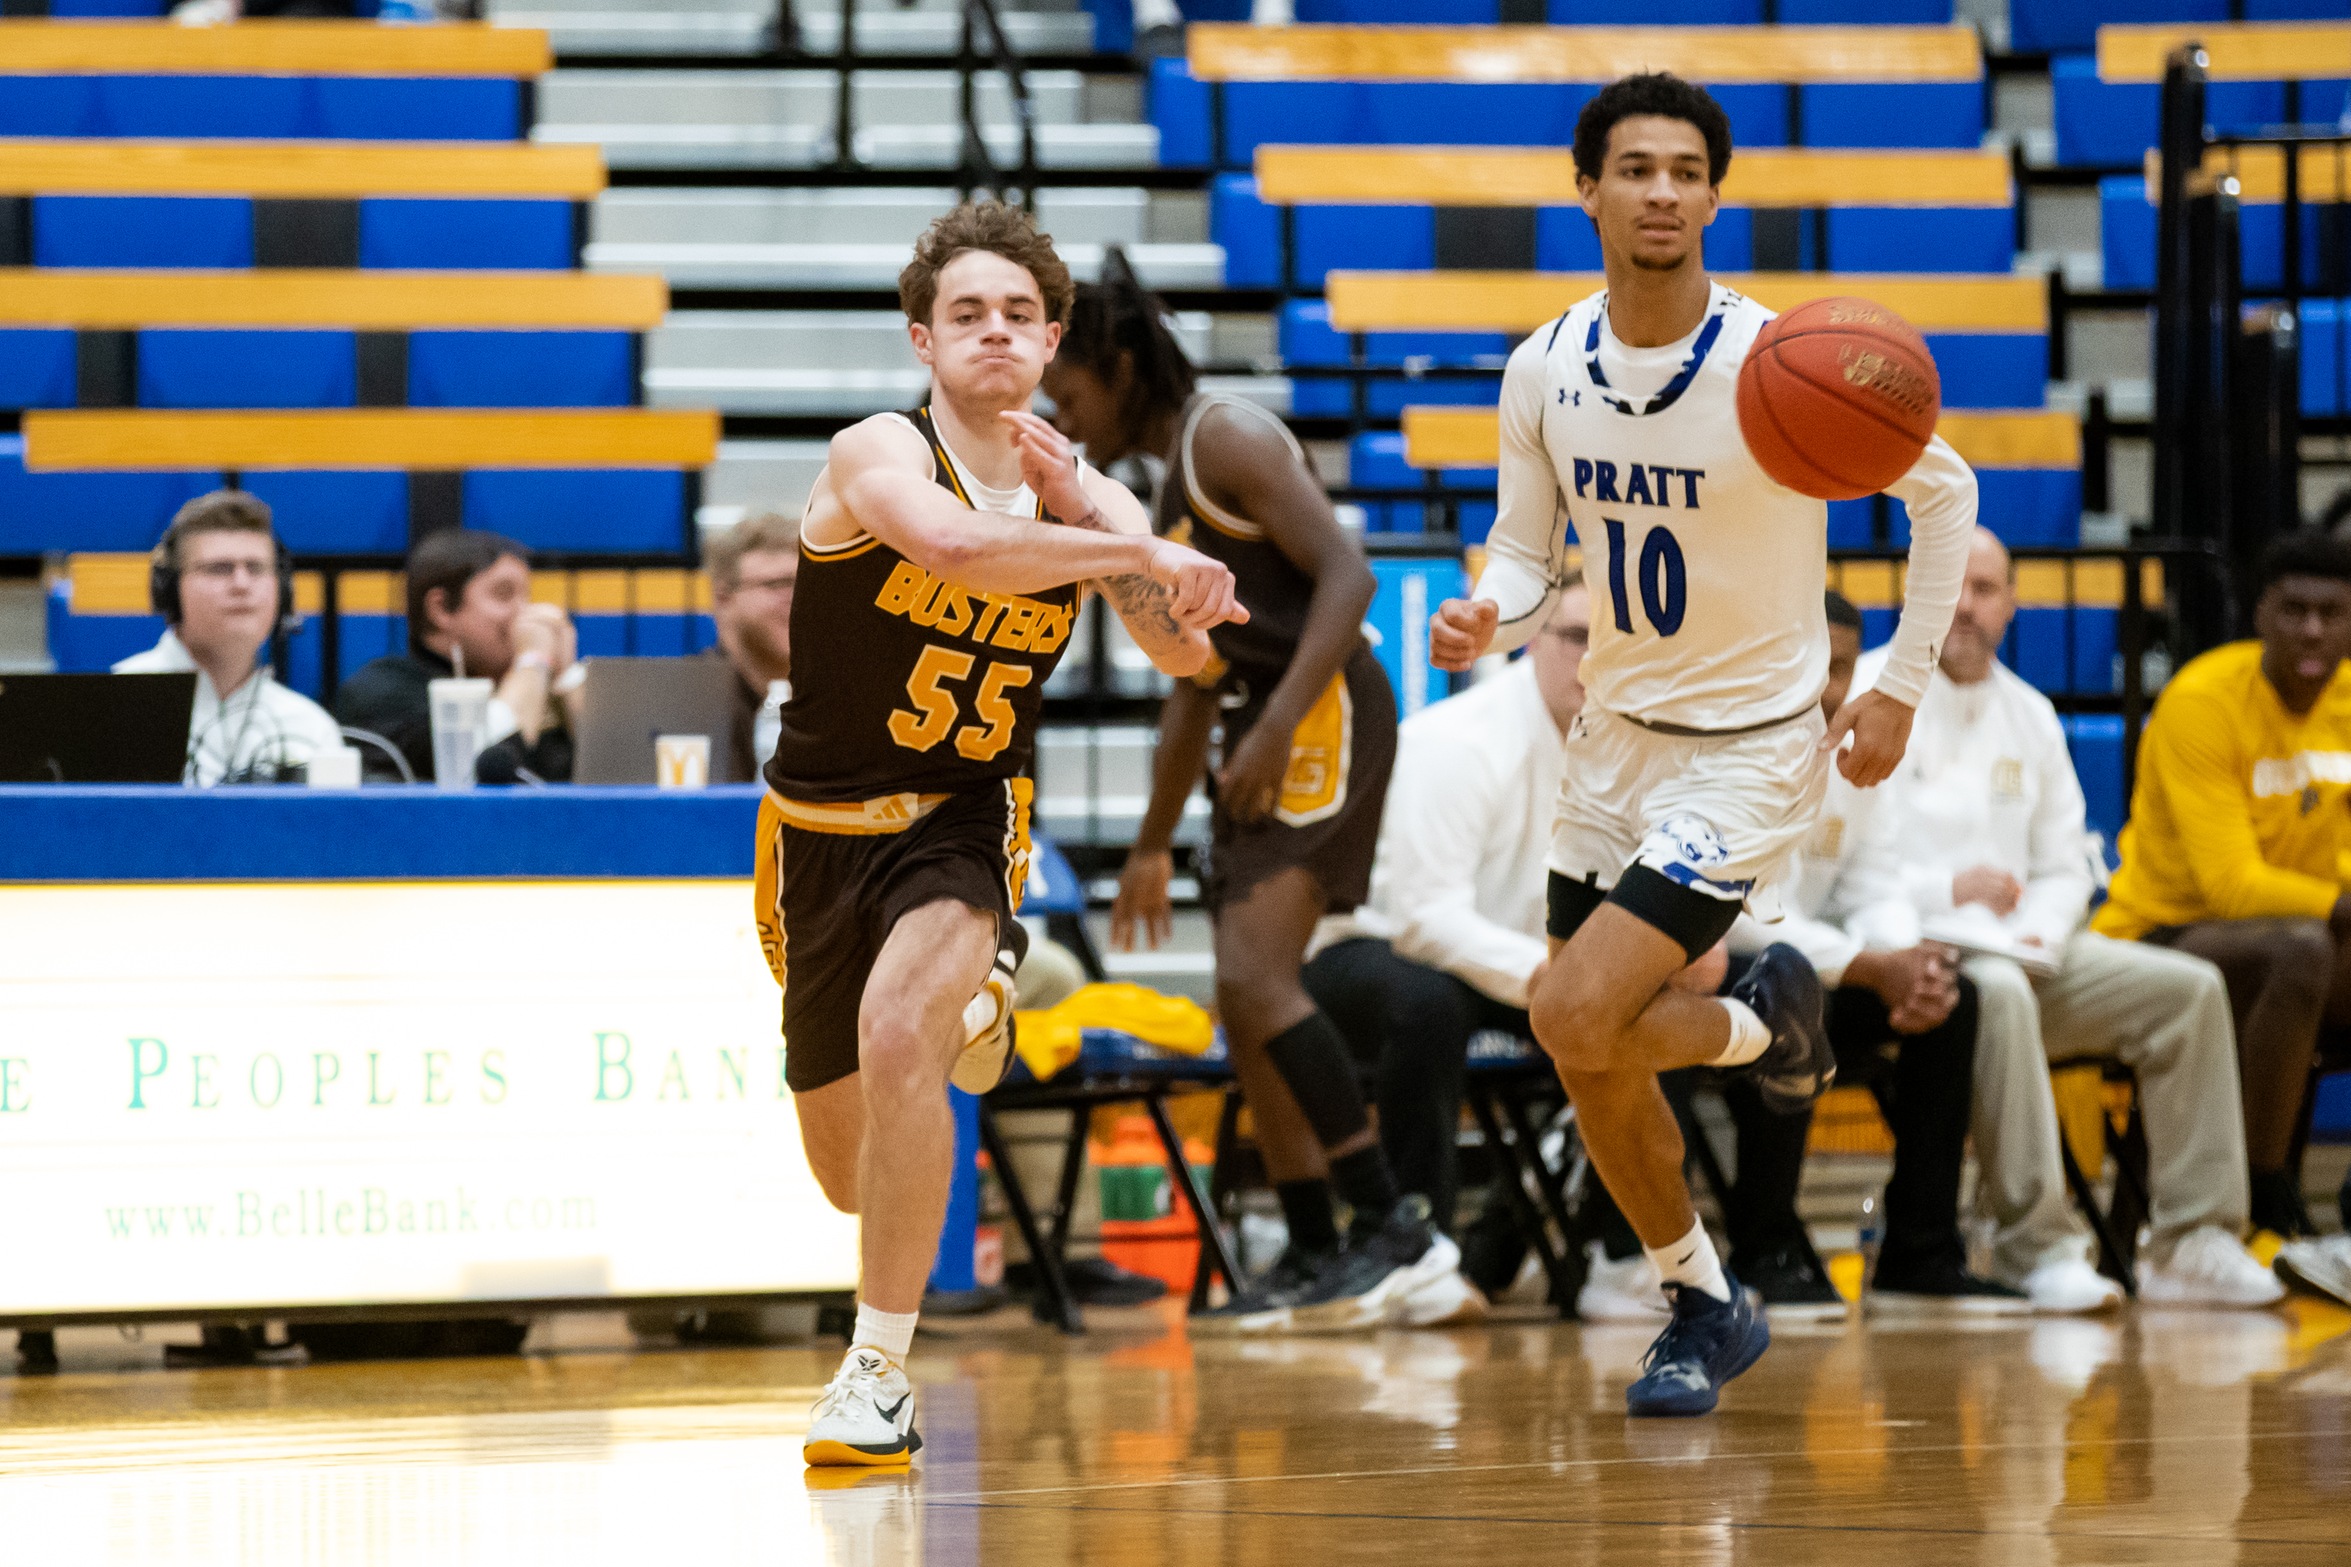 Robinson pours in 44 as Broncobusters set 3-point mark in blowout win over Pratt